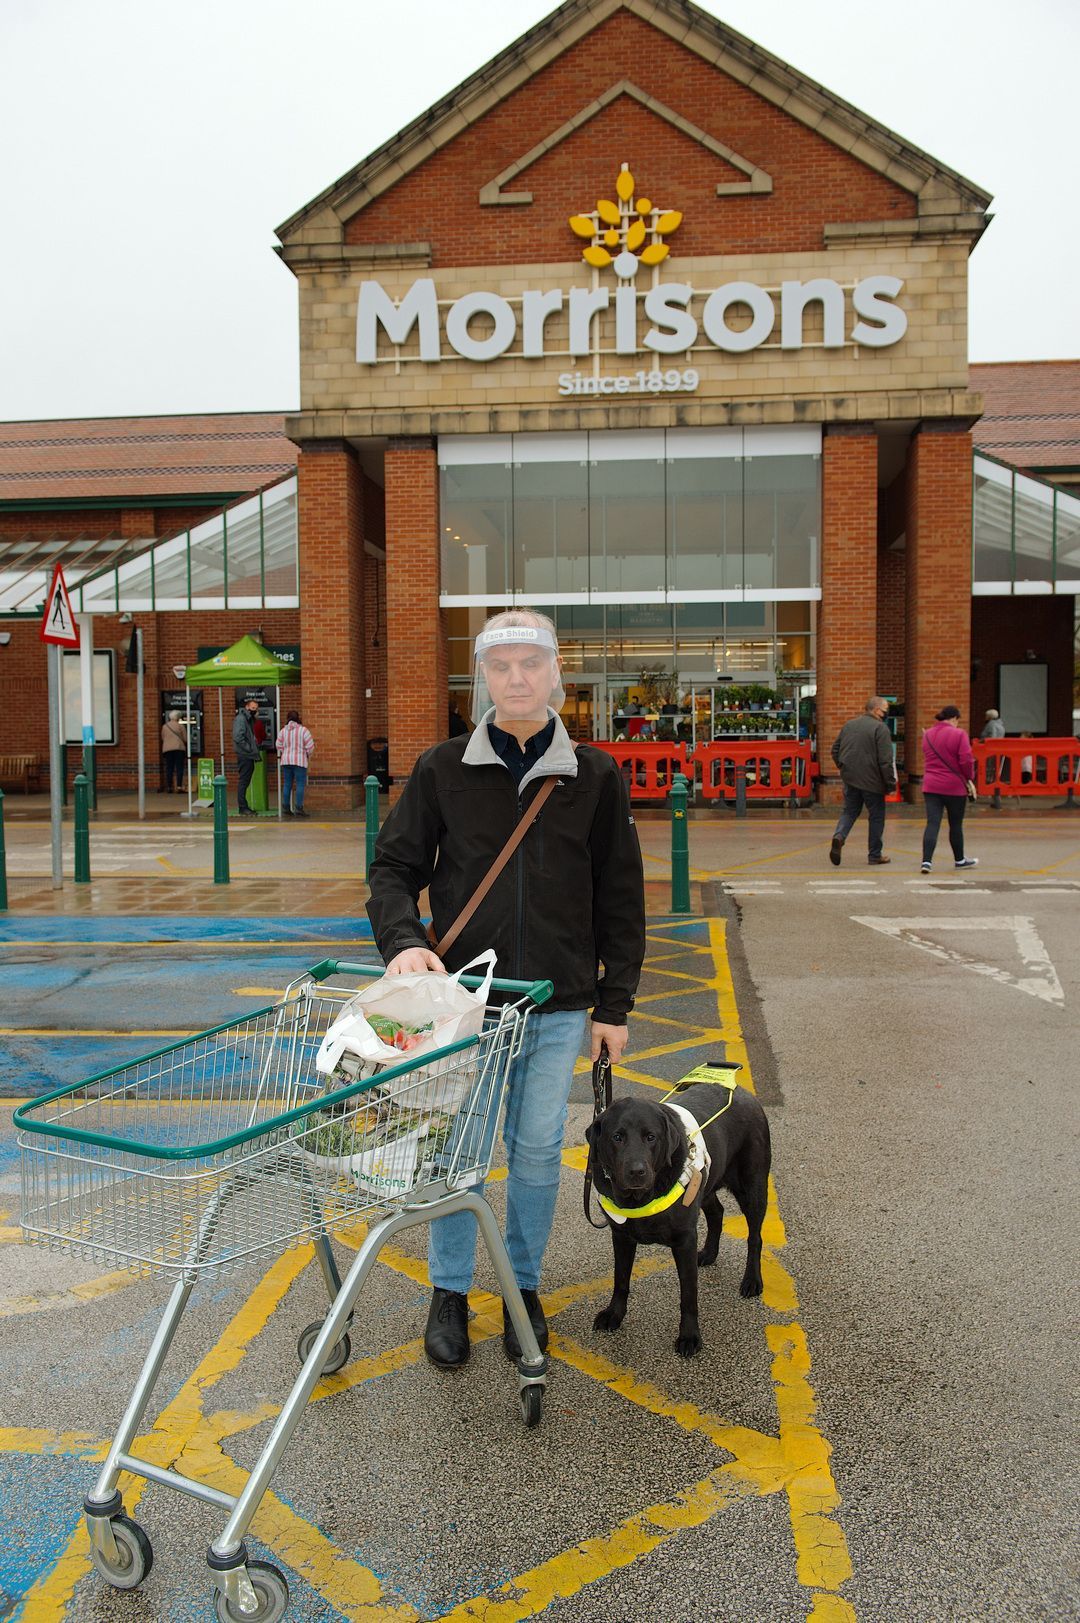 Philip Anderson stands outside Morrisons with his guide dog and a shopping trolley.